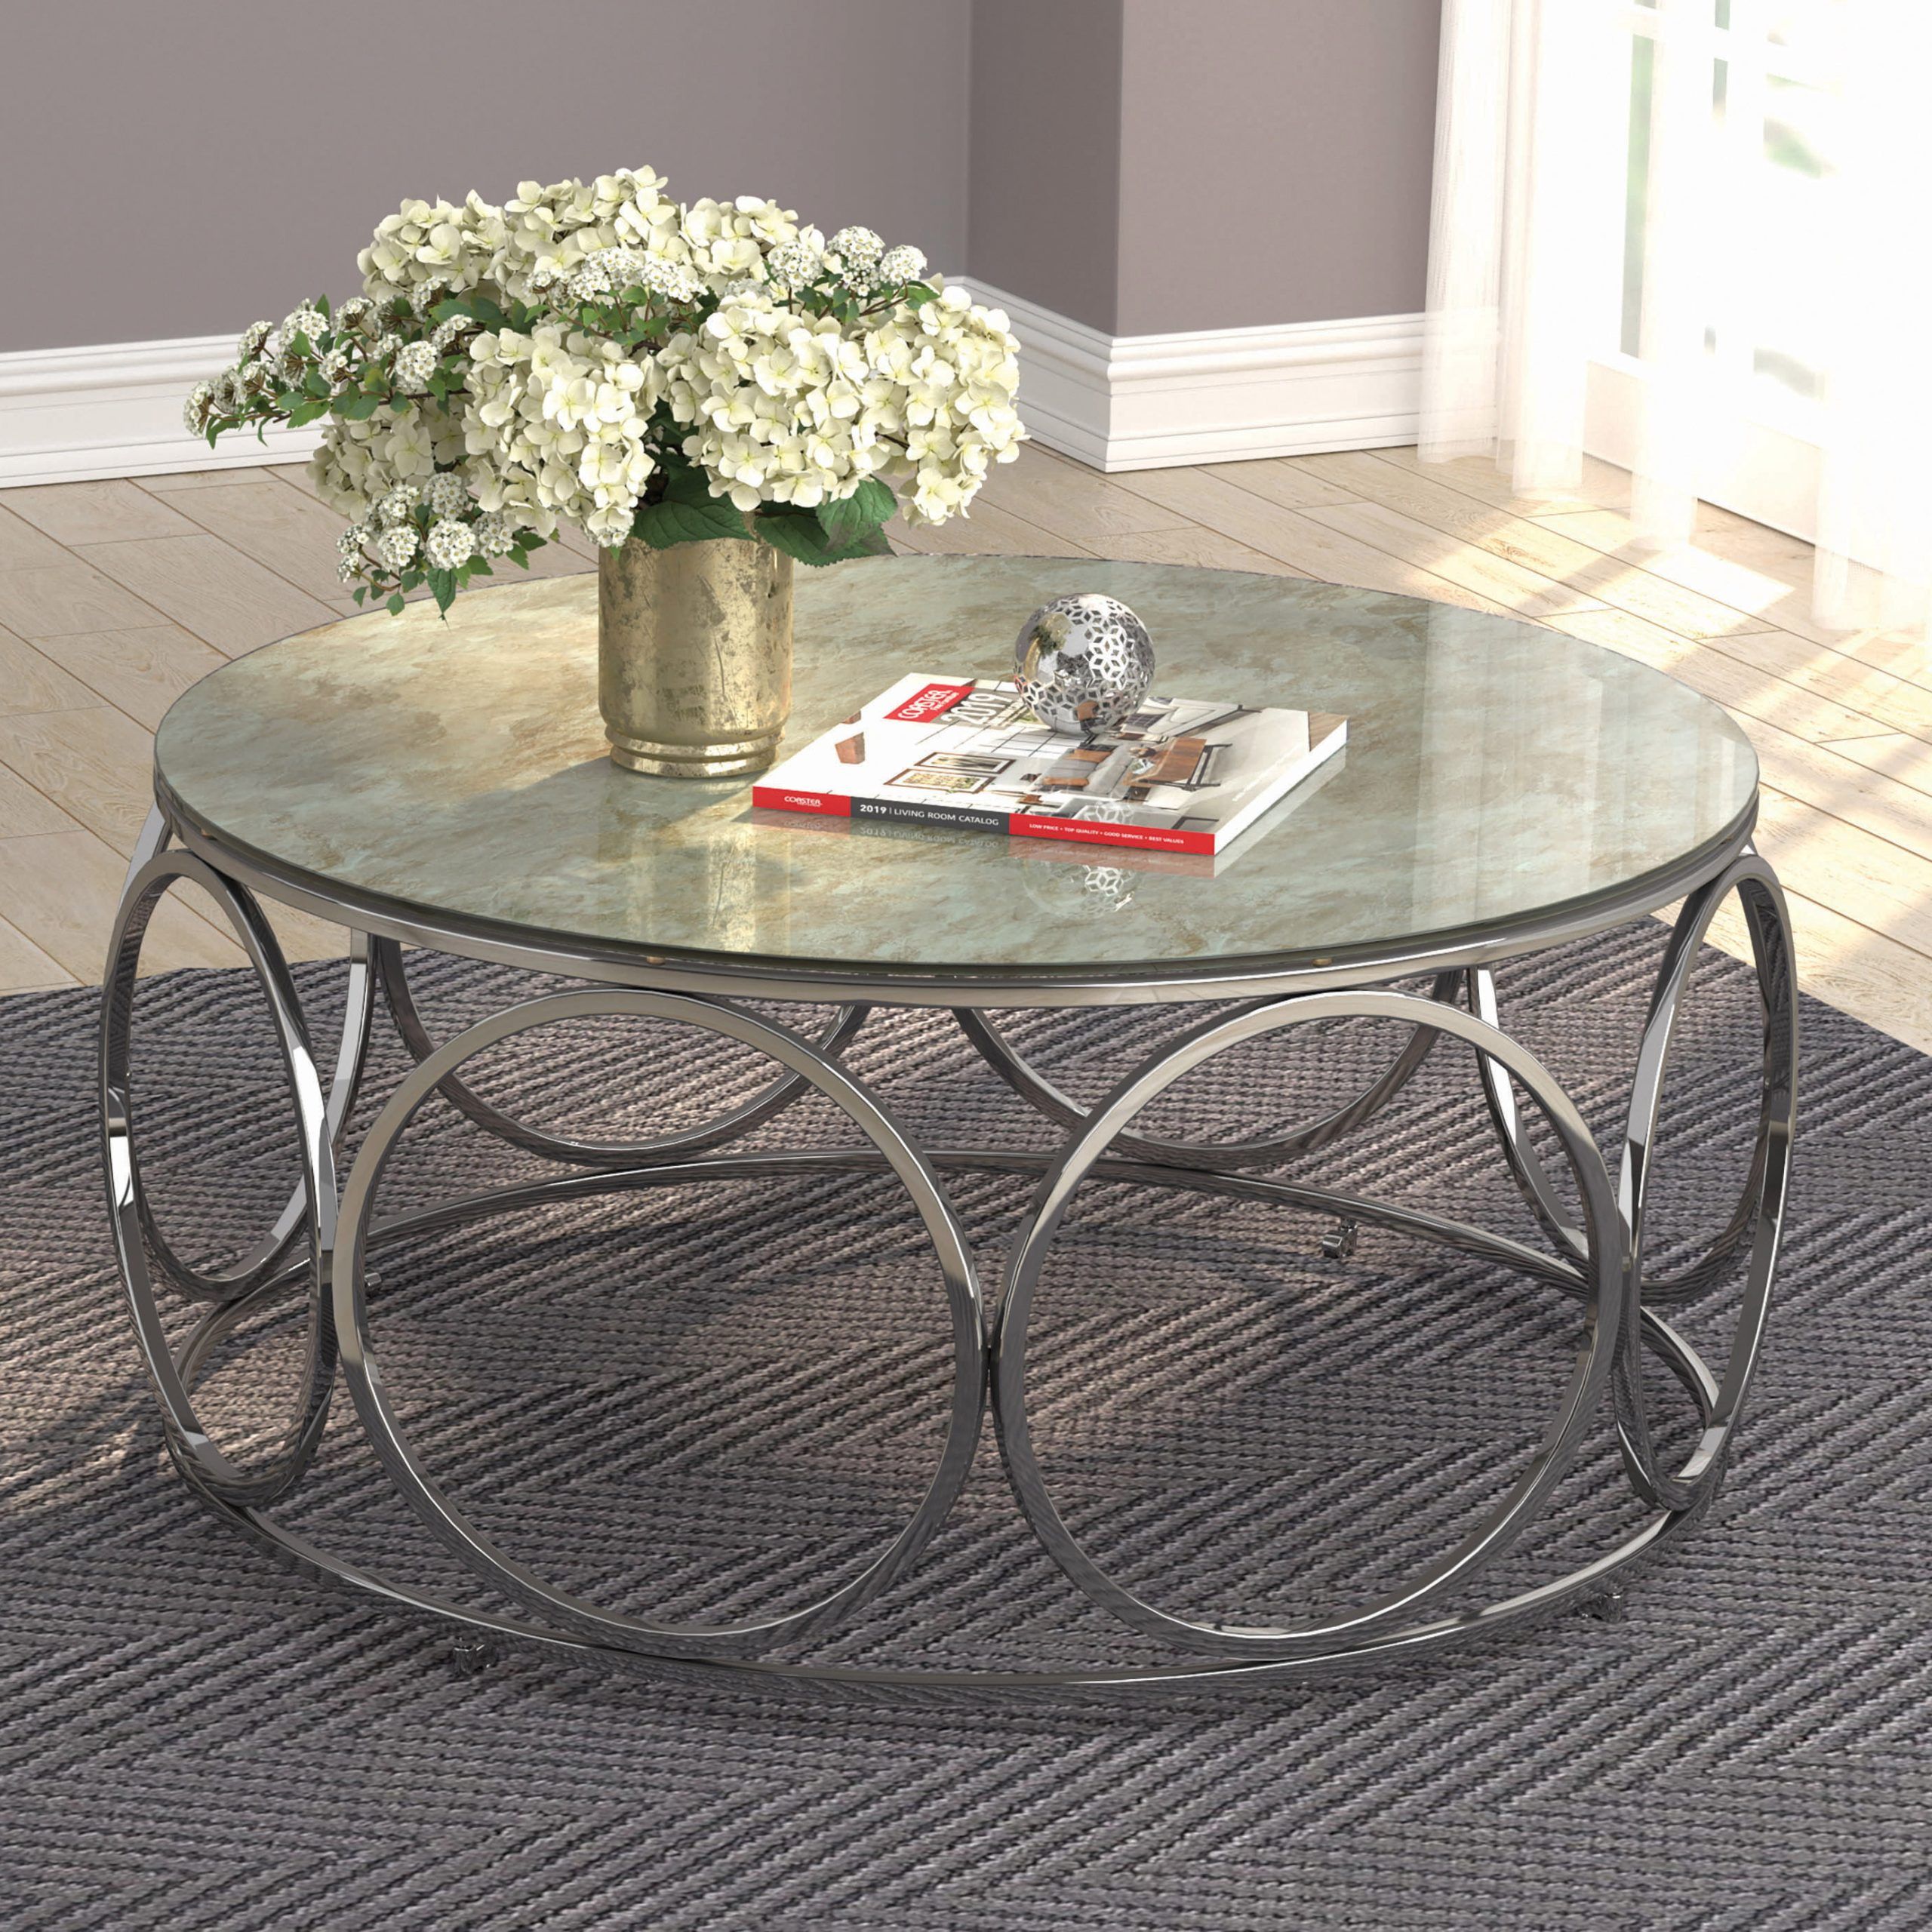 Round Coffee Table With Casters Beige Marble And Chrome – Walmart Inside Coffee Tables With Casters (Gallery 5 of 21)